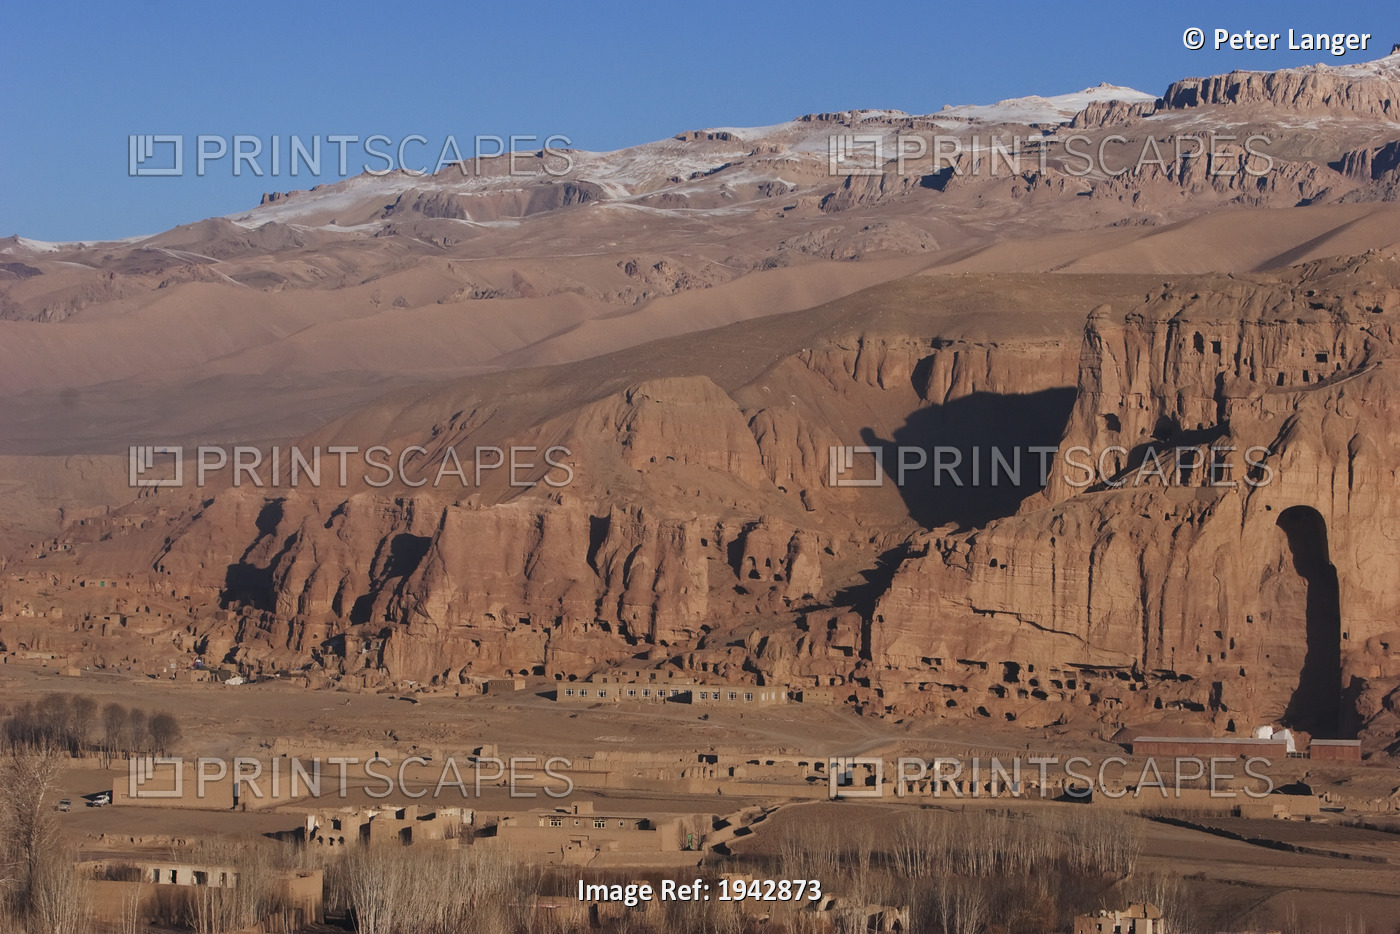 Panoramic View Of Bamiyan And The Escarpment With Hundreds Of Caves And The ...